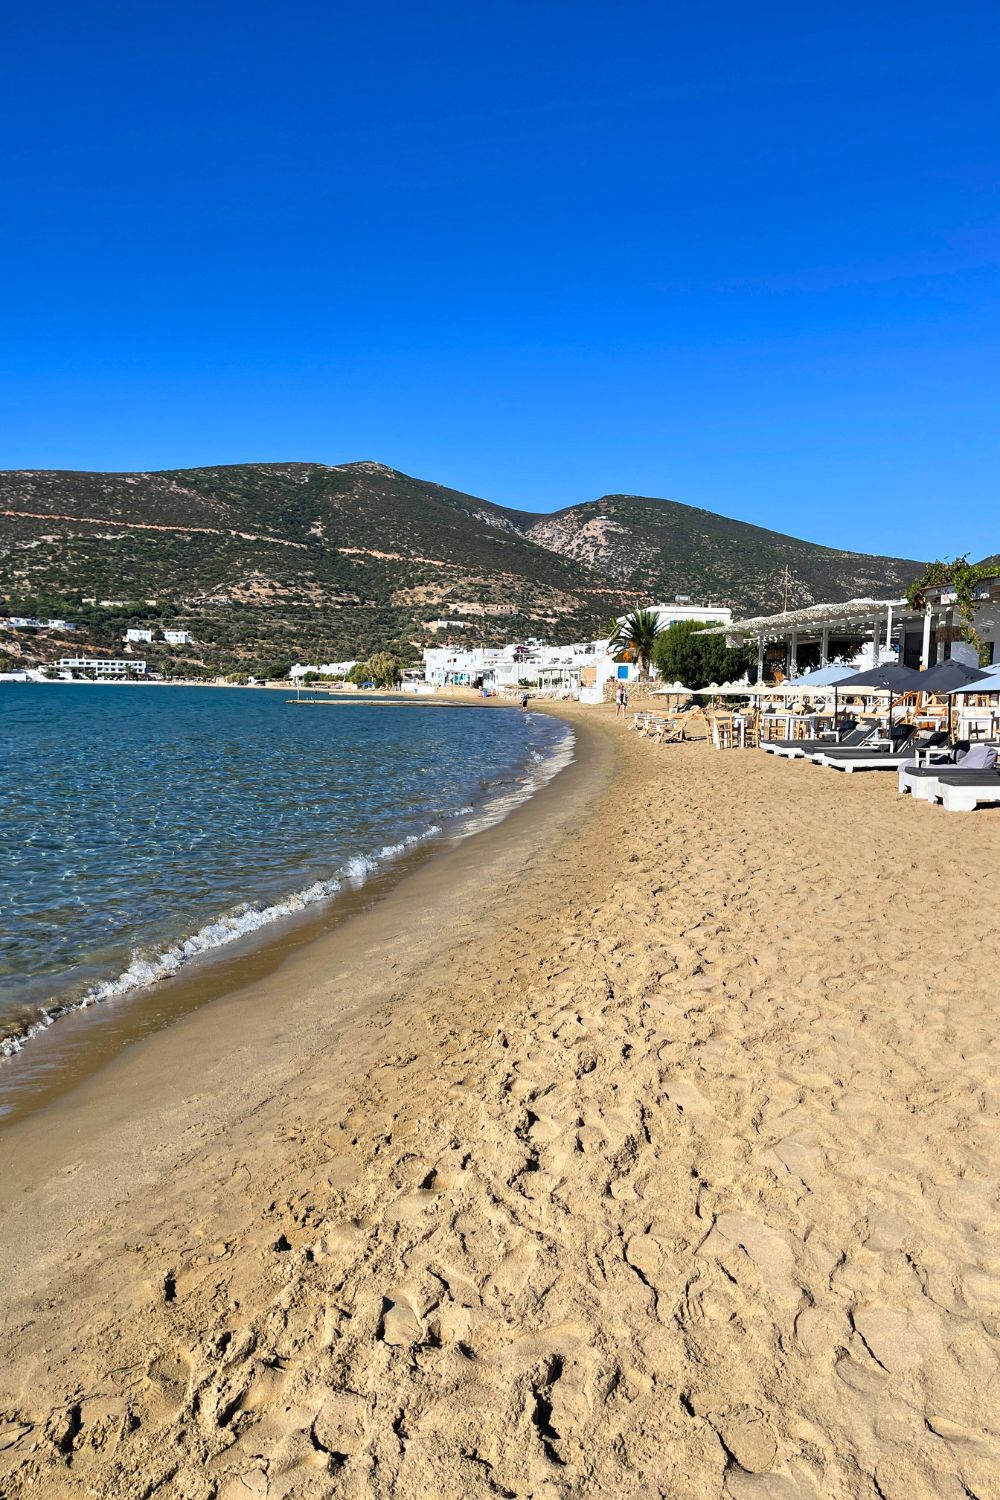 The gentle curve of a sandy beach in Sifnos, lined with beach chairs and umbrellas, set against the backdrop of a tranquil bay and rolling hills.